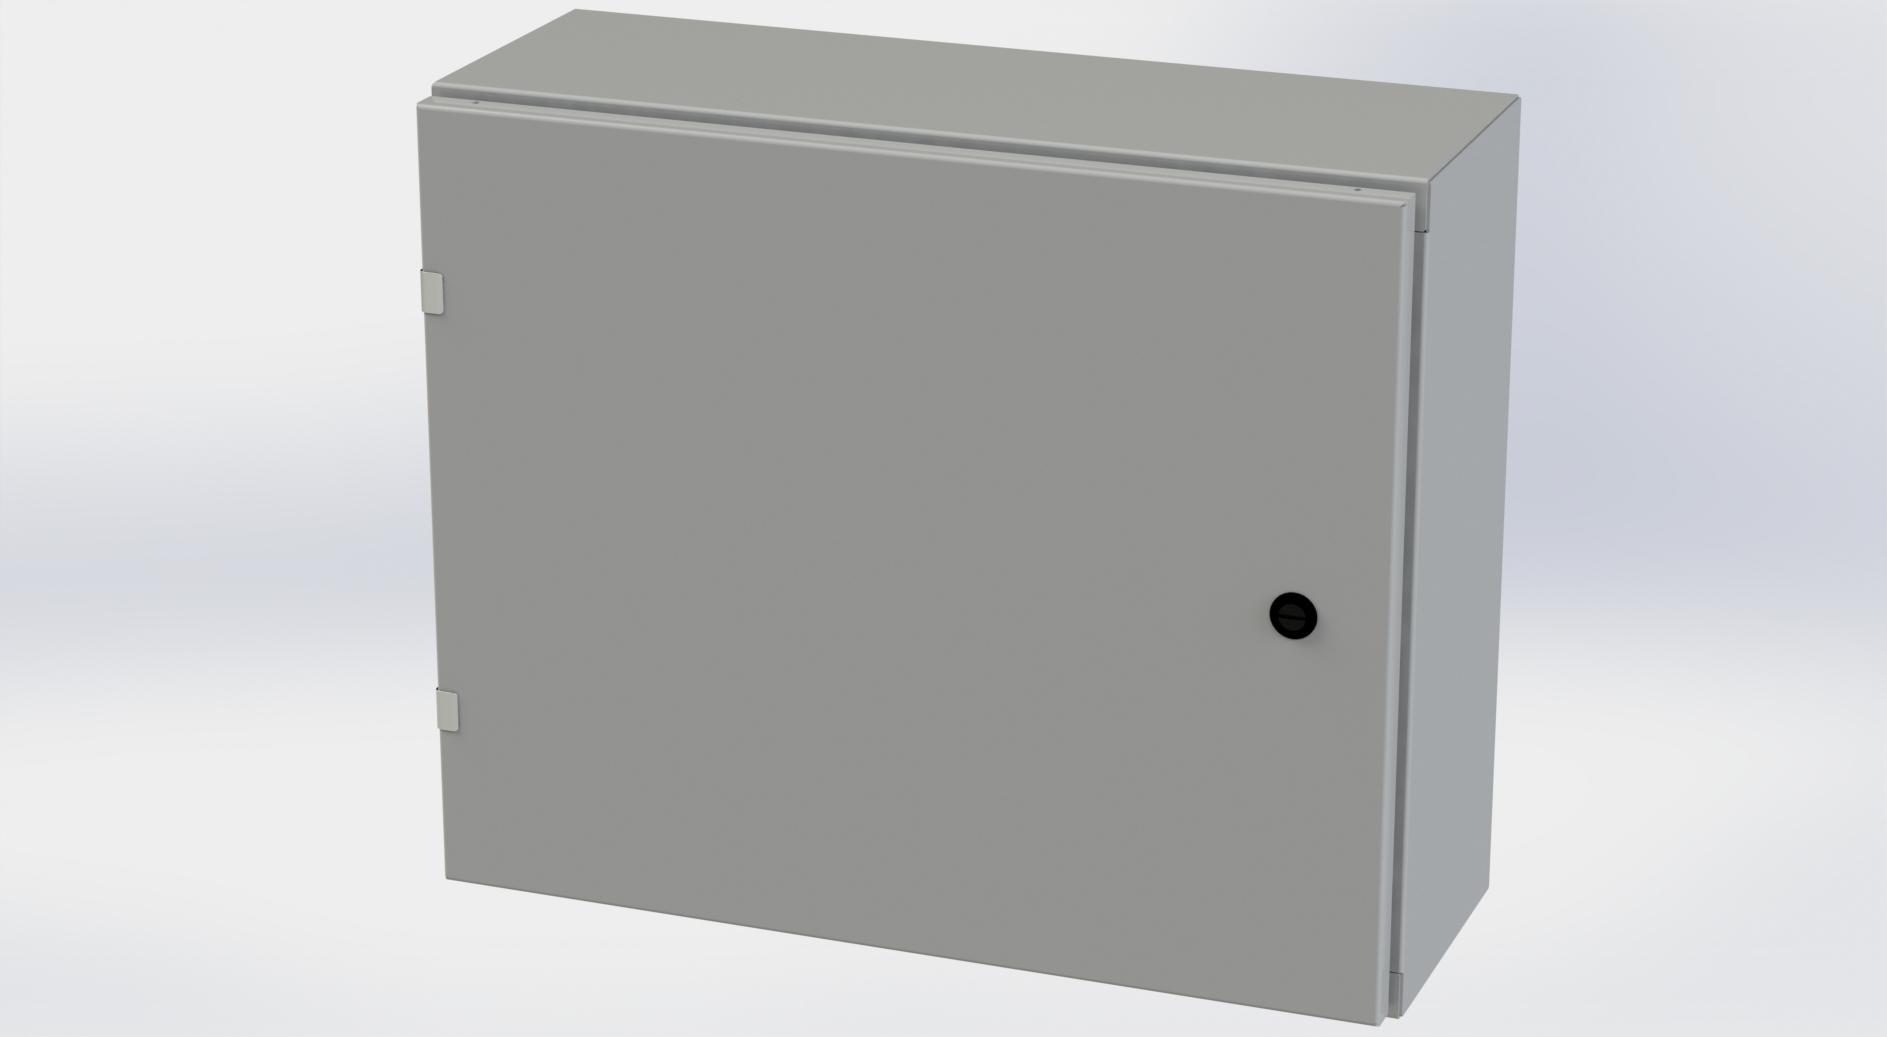 Saginaw Control SCE-20EL2408LP EL Enclosure, Height:20.00", Width:24.00", Depth:8.00", ANSI-61 gray powder coating inside and out. Optional sub-panels are powder coated white.